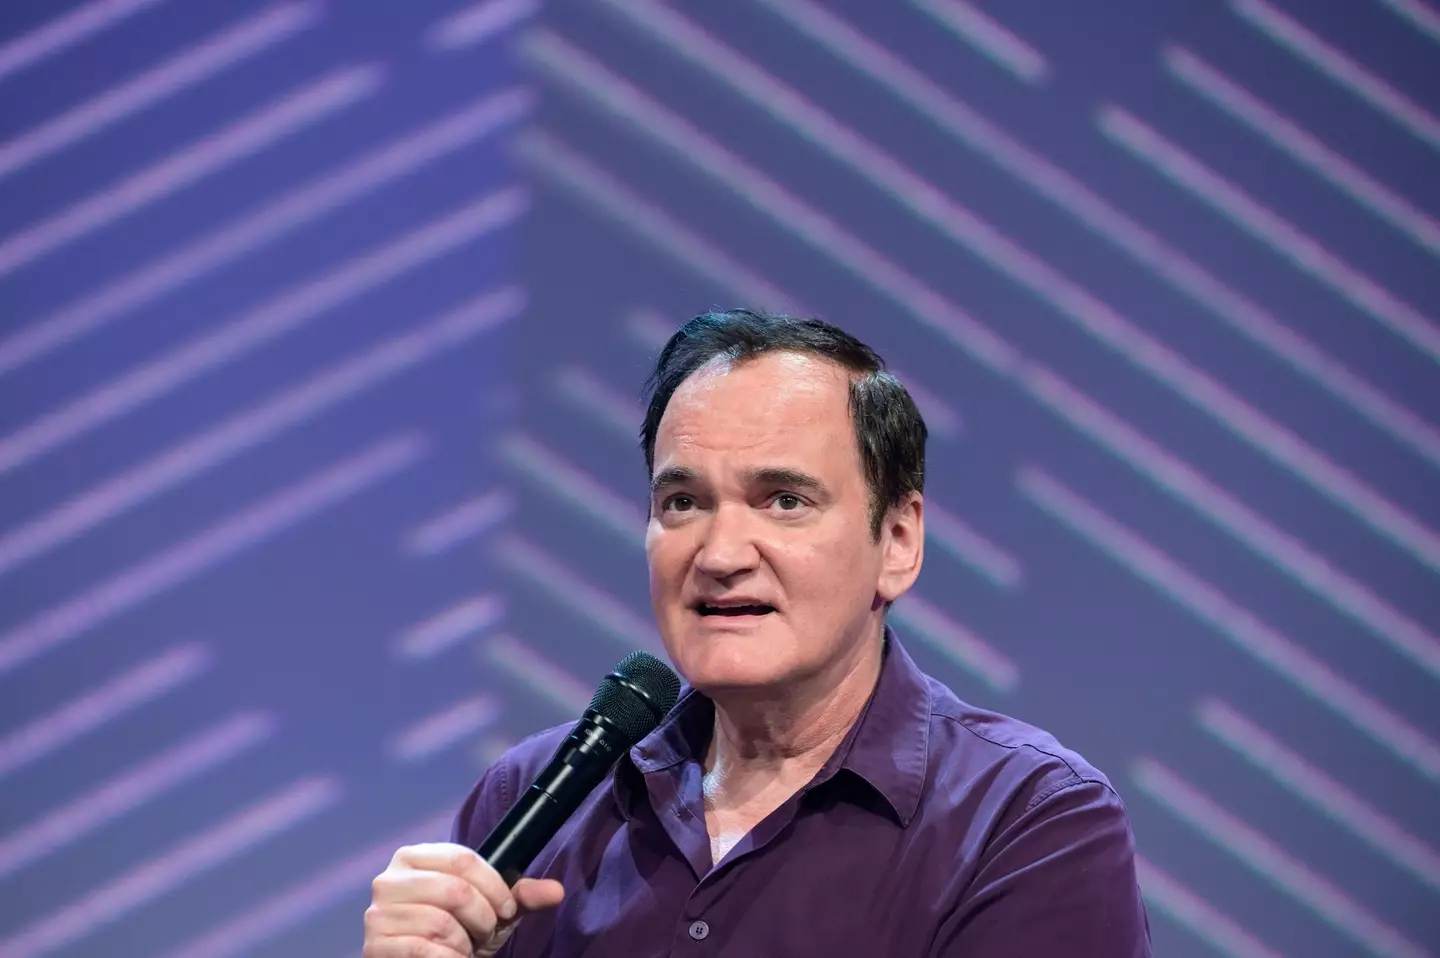 Quentin Tarantino has shared his opinion on one of the worst movies made.